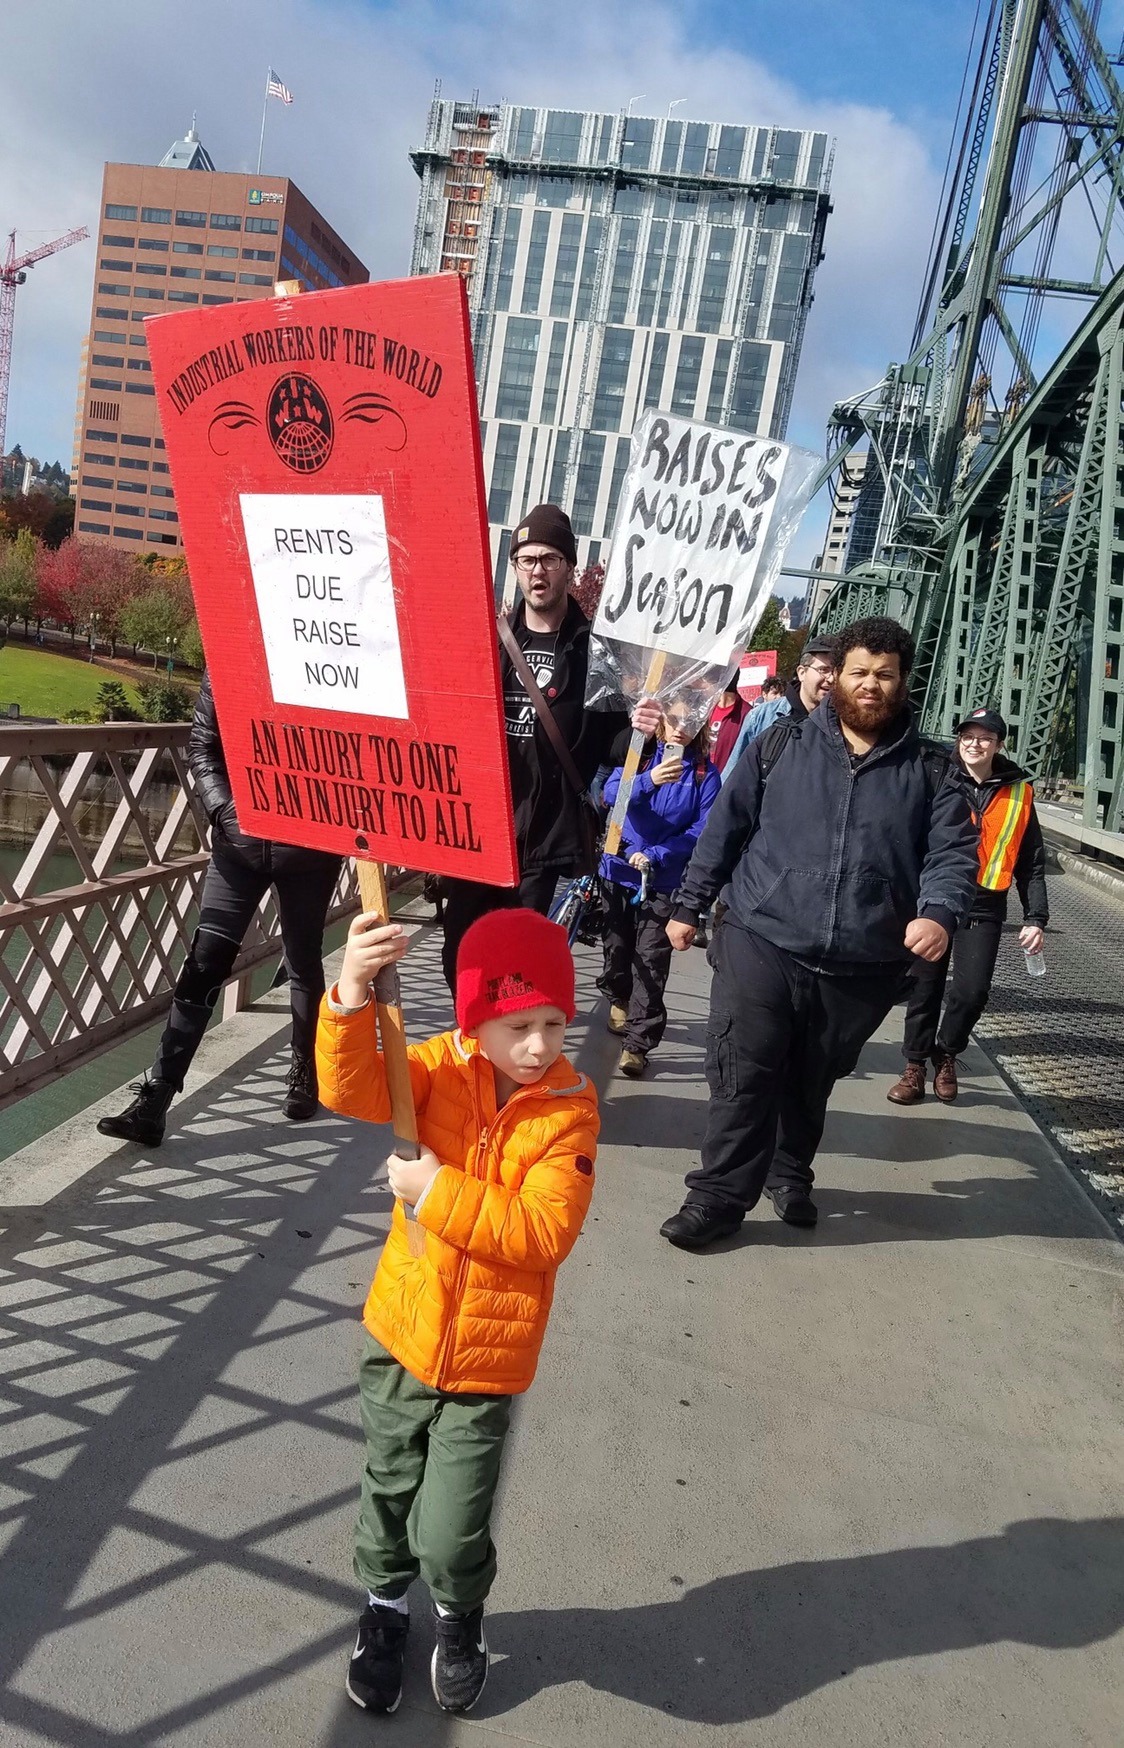 Burgerville Workers Union members and their supporters march across the Willamette River to the Hawthorne Burgerville location to announce their strike.